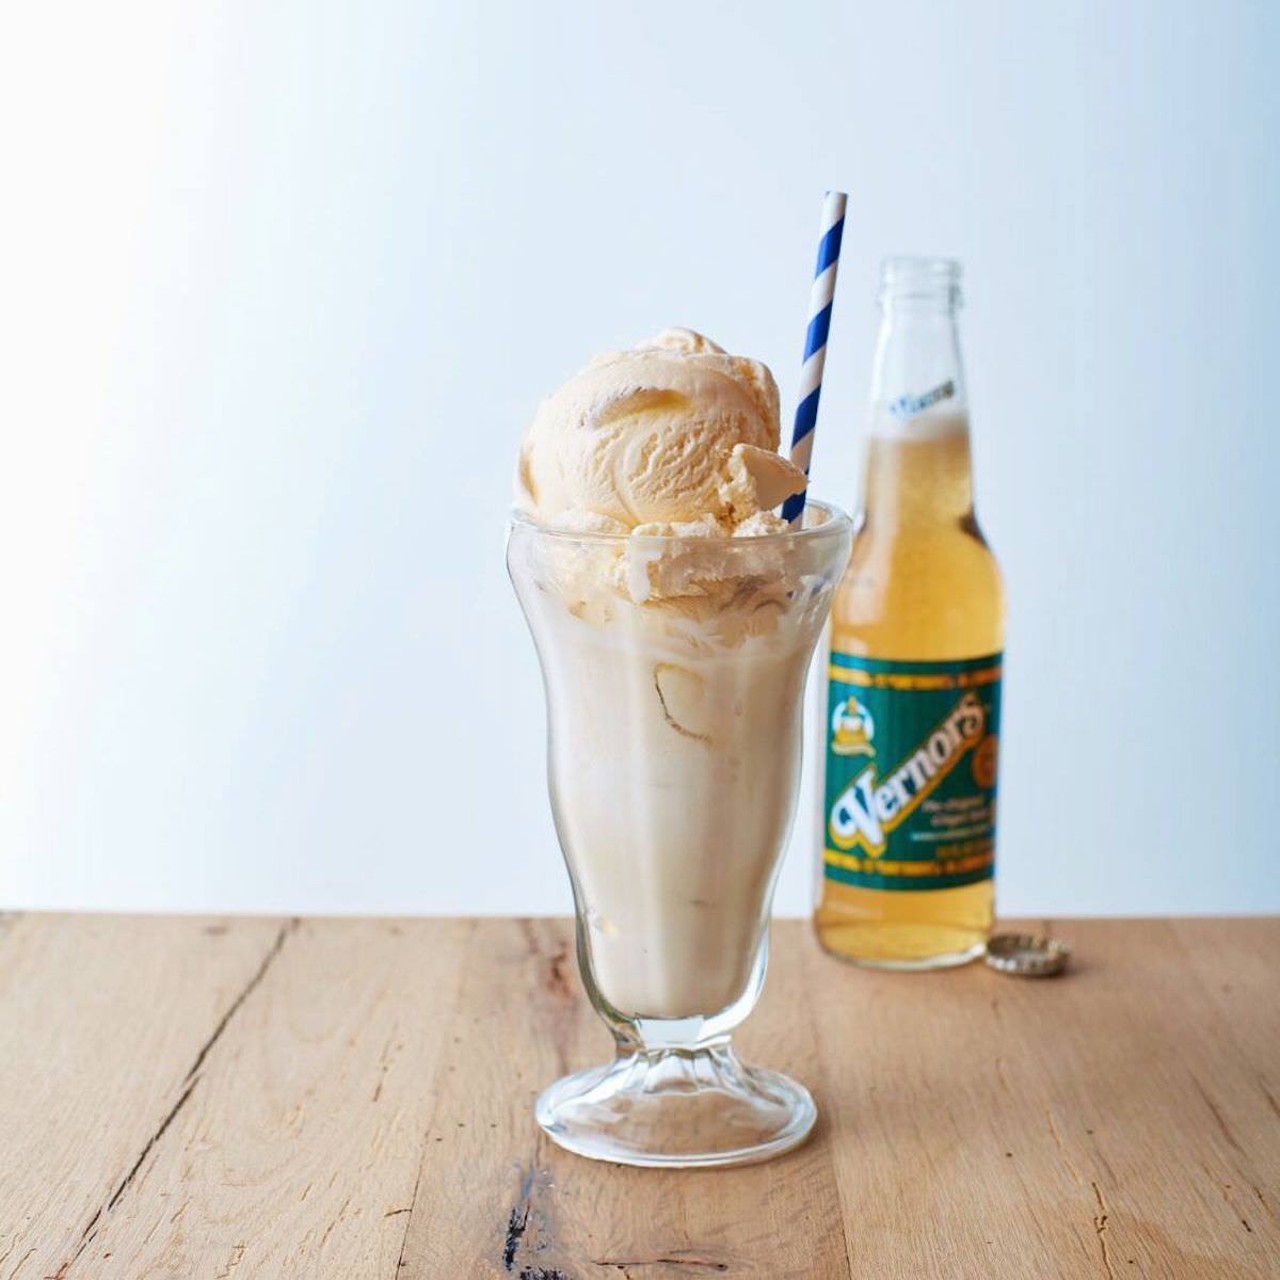  Boston Cooler
While this recipe is literally the easiest ever as it involves just two ingredients, it is possible to make a major mistake by using some generic-ass ginger ale. Well, folks, that&#146;s a goddamn sin. A Boston Cooler requires vanilla ice cream and Vernors. Not Schweppes, Seagrams, or bullshit Canada Dry, but Vernors &#151; the Detroit-born carbonated remedy to all things. P.S. You can add booze because, you know, booze. 
Find the recipe here.
Photo via Hudsonville Ice Cream/Facebook